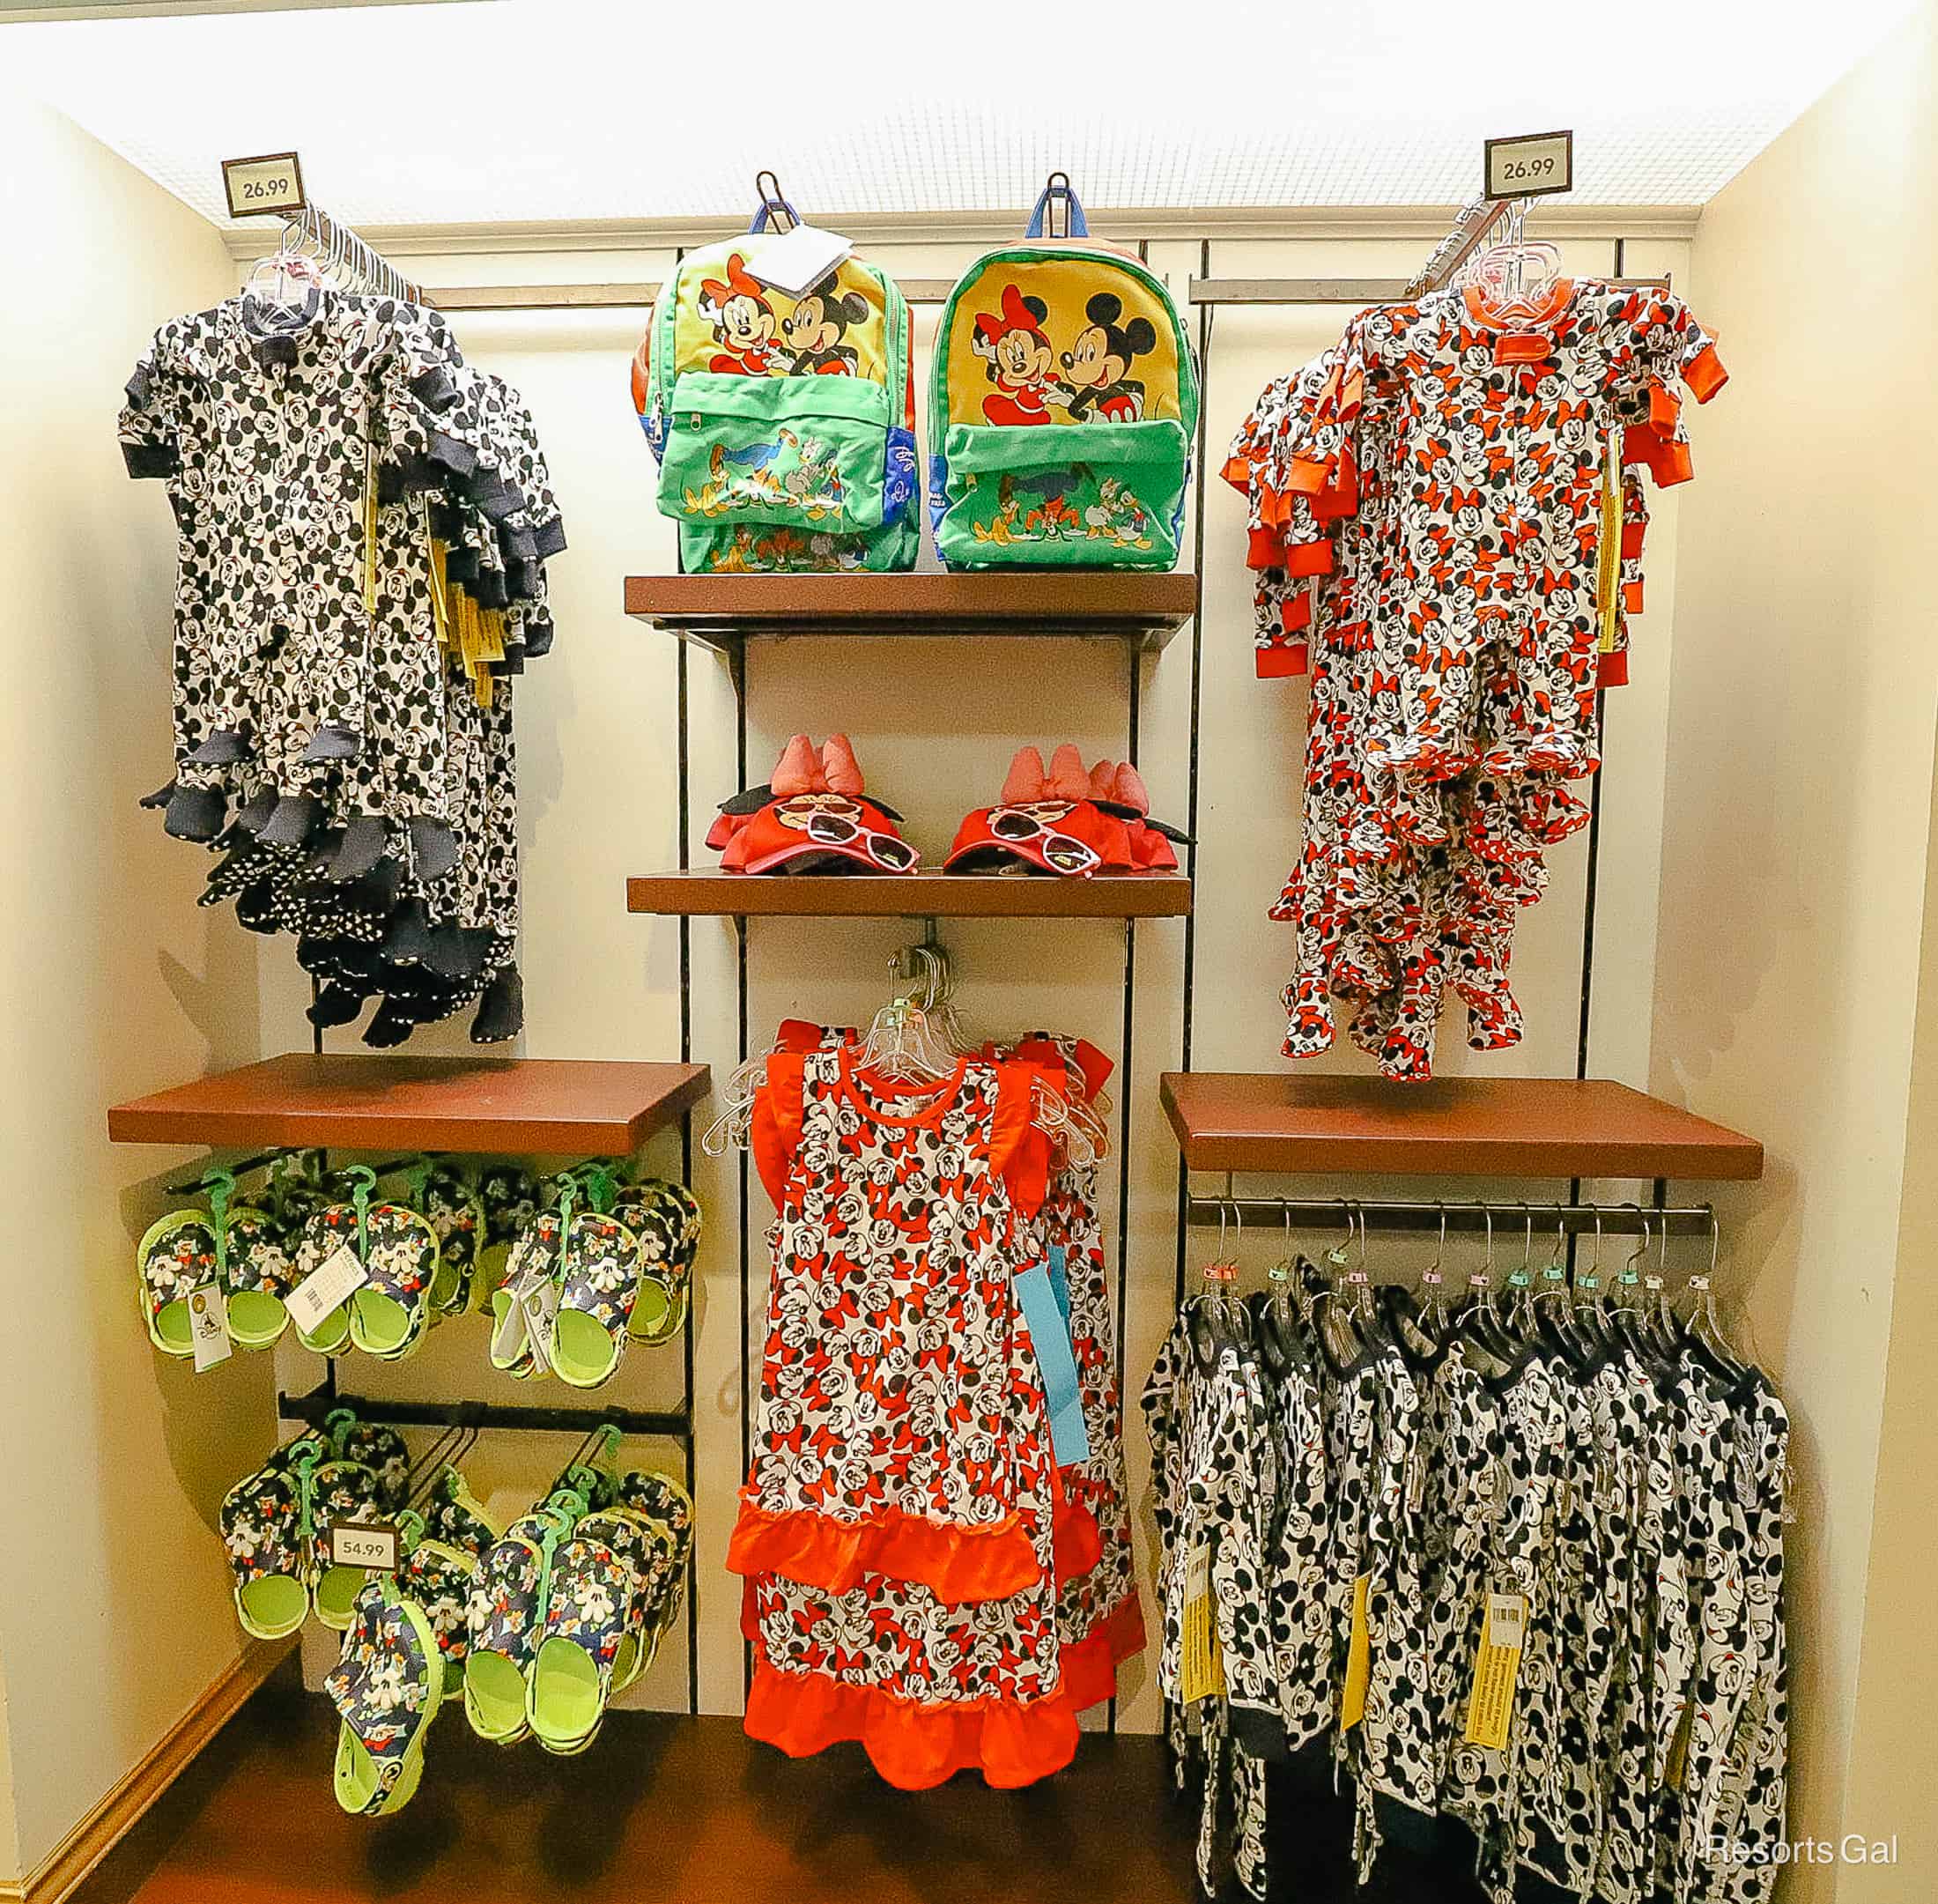 Disney-themed pajamas in the gift shop at Port Orleans French Quarter